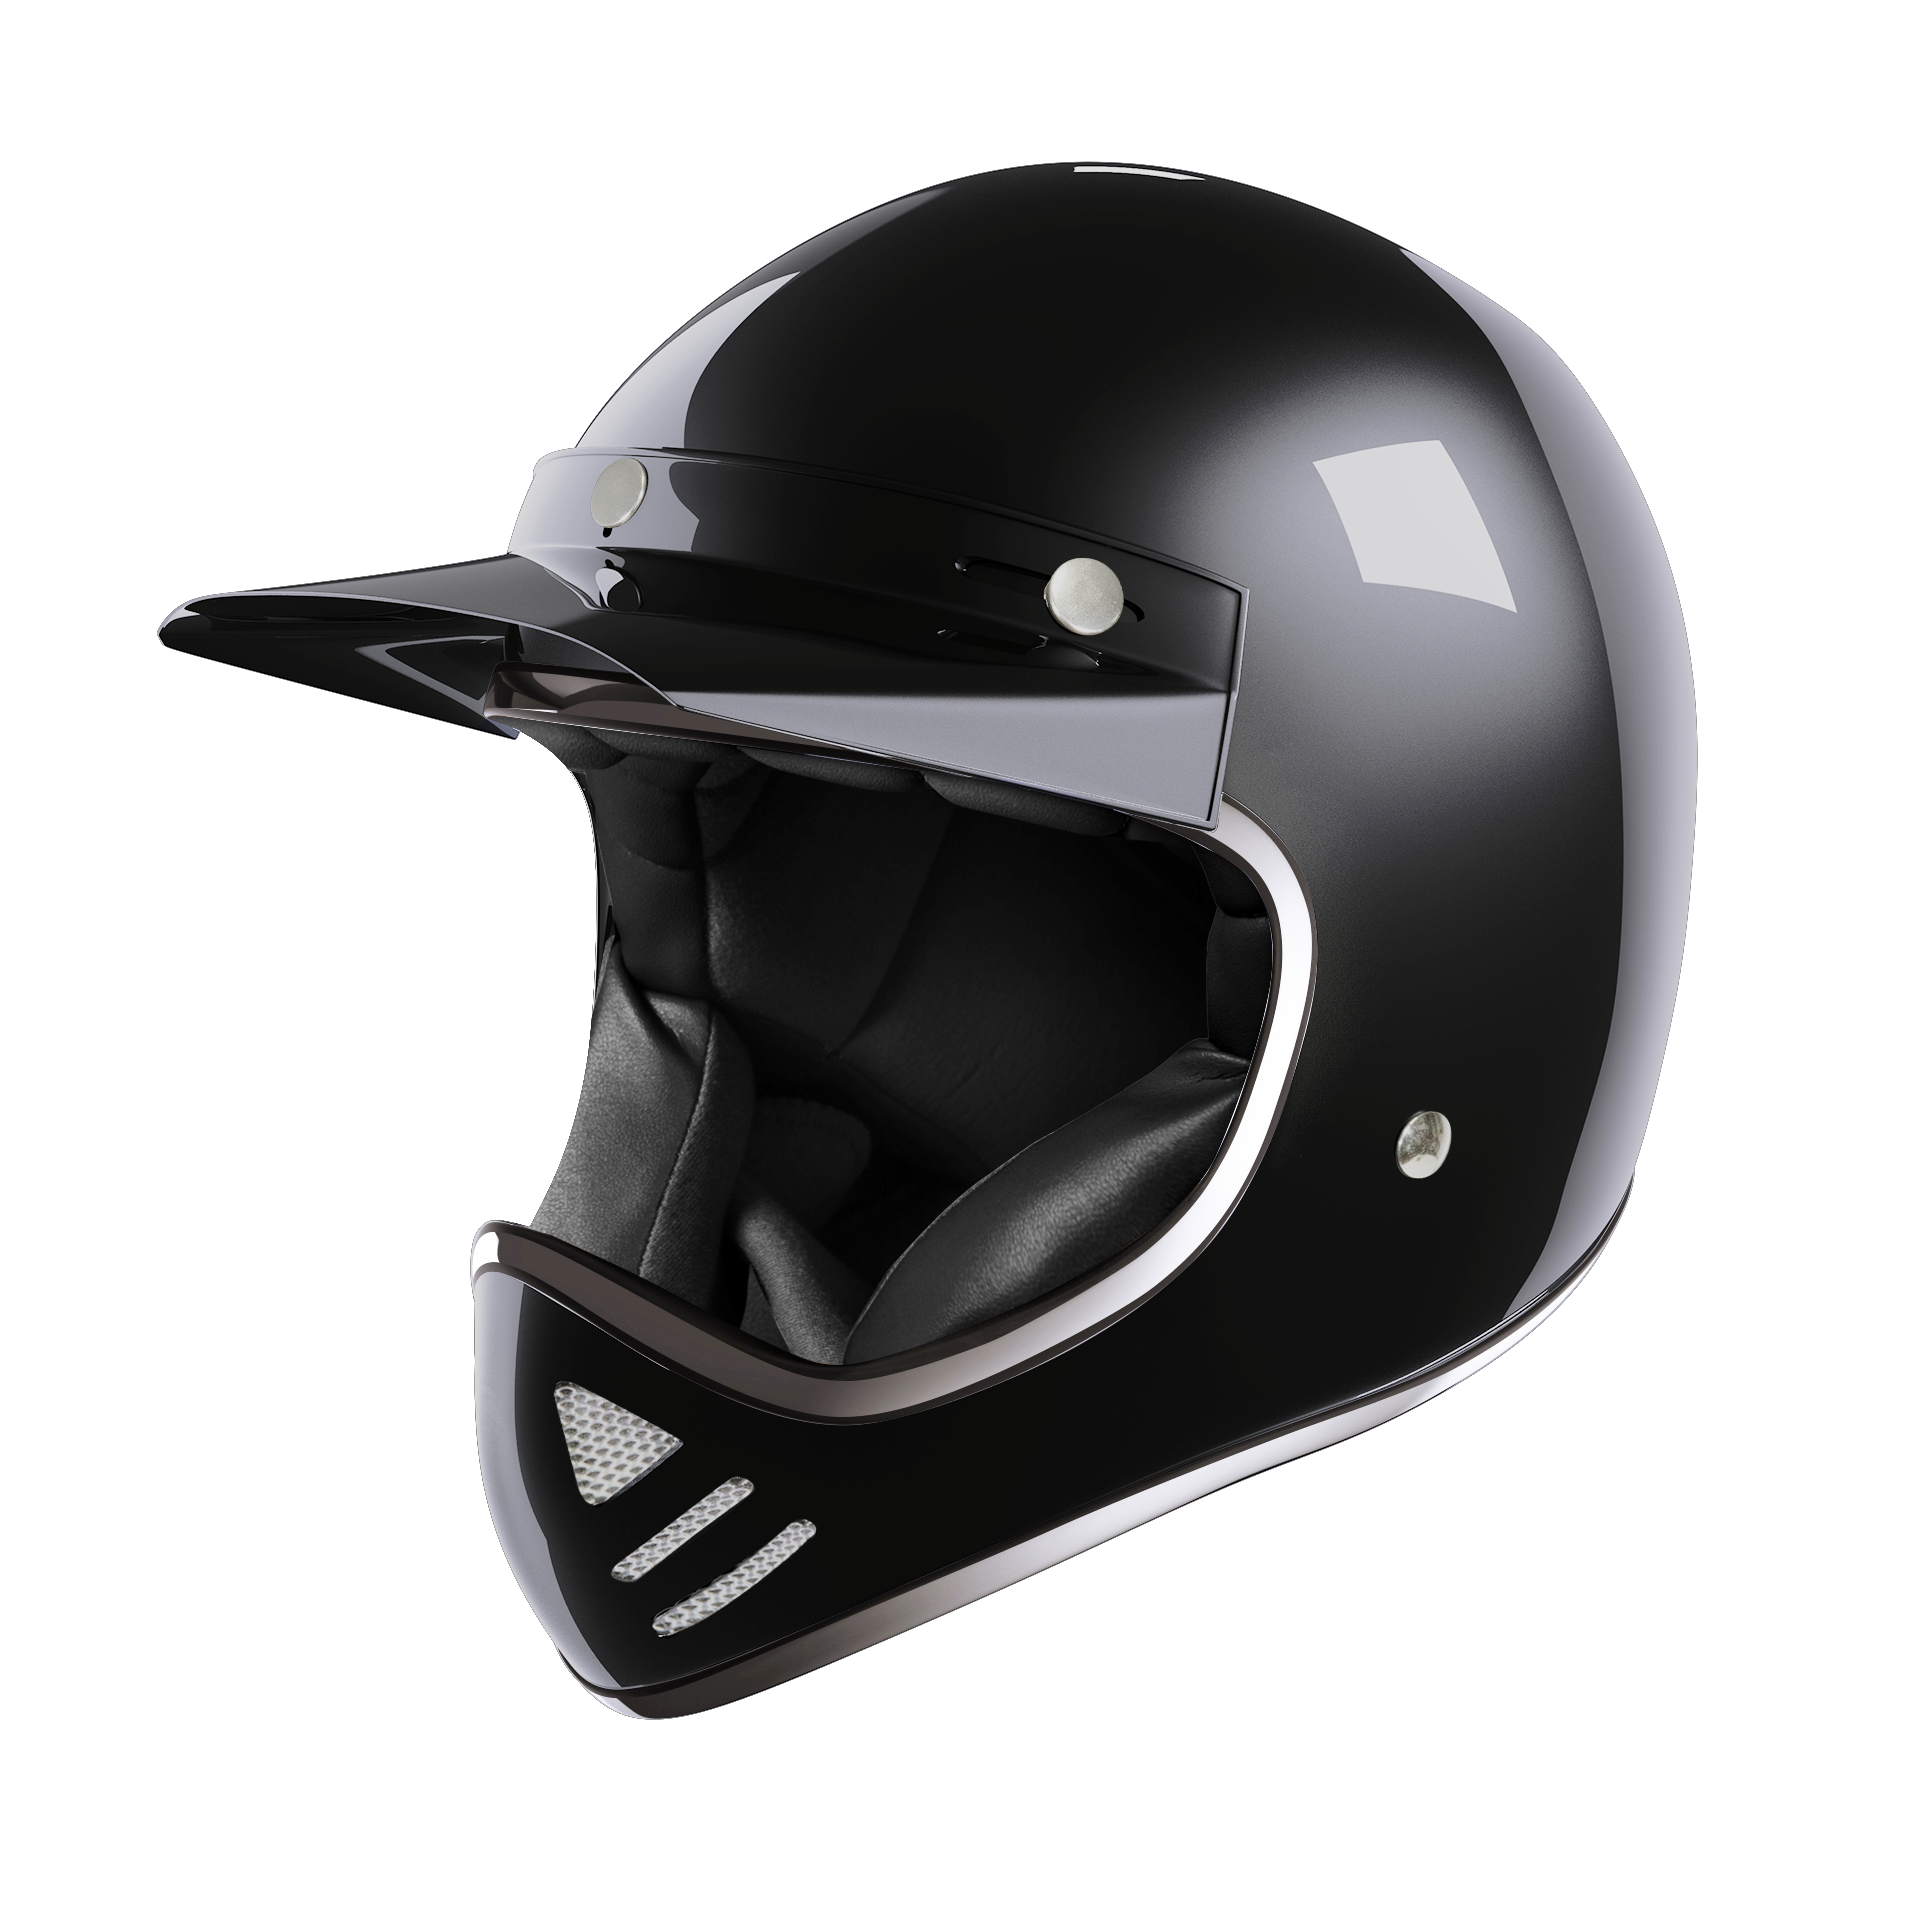 Crossroad  Stormer : Motorcycle helmets, gear and accessories